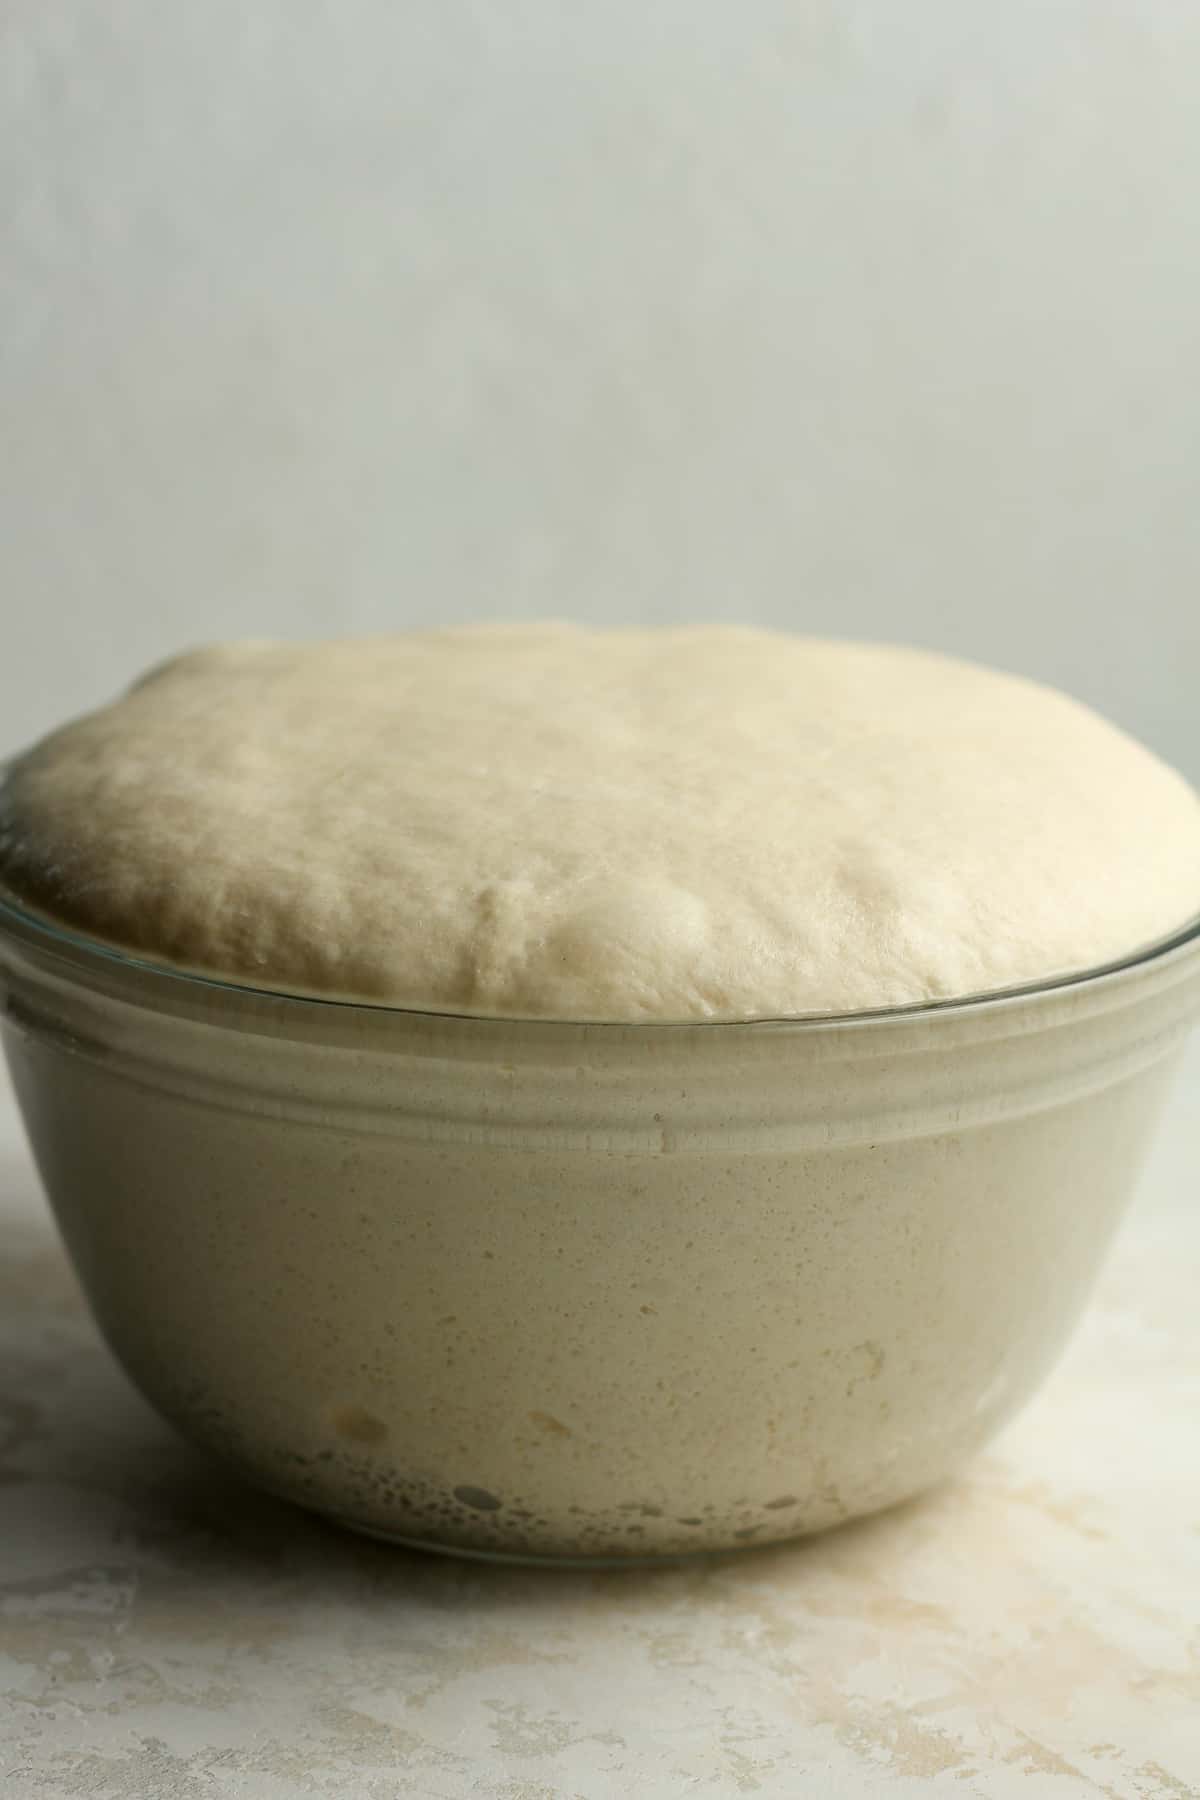 Side view of a bowl of pizza dough rising above the bowl.